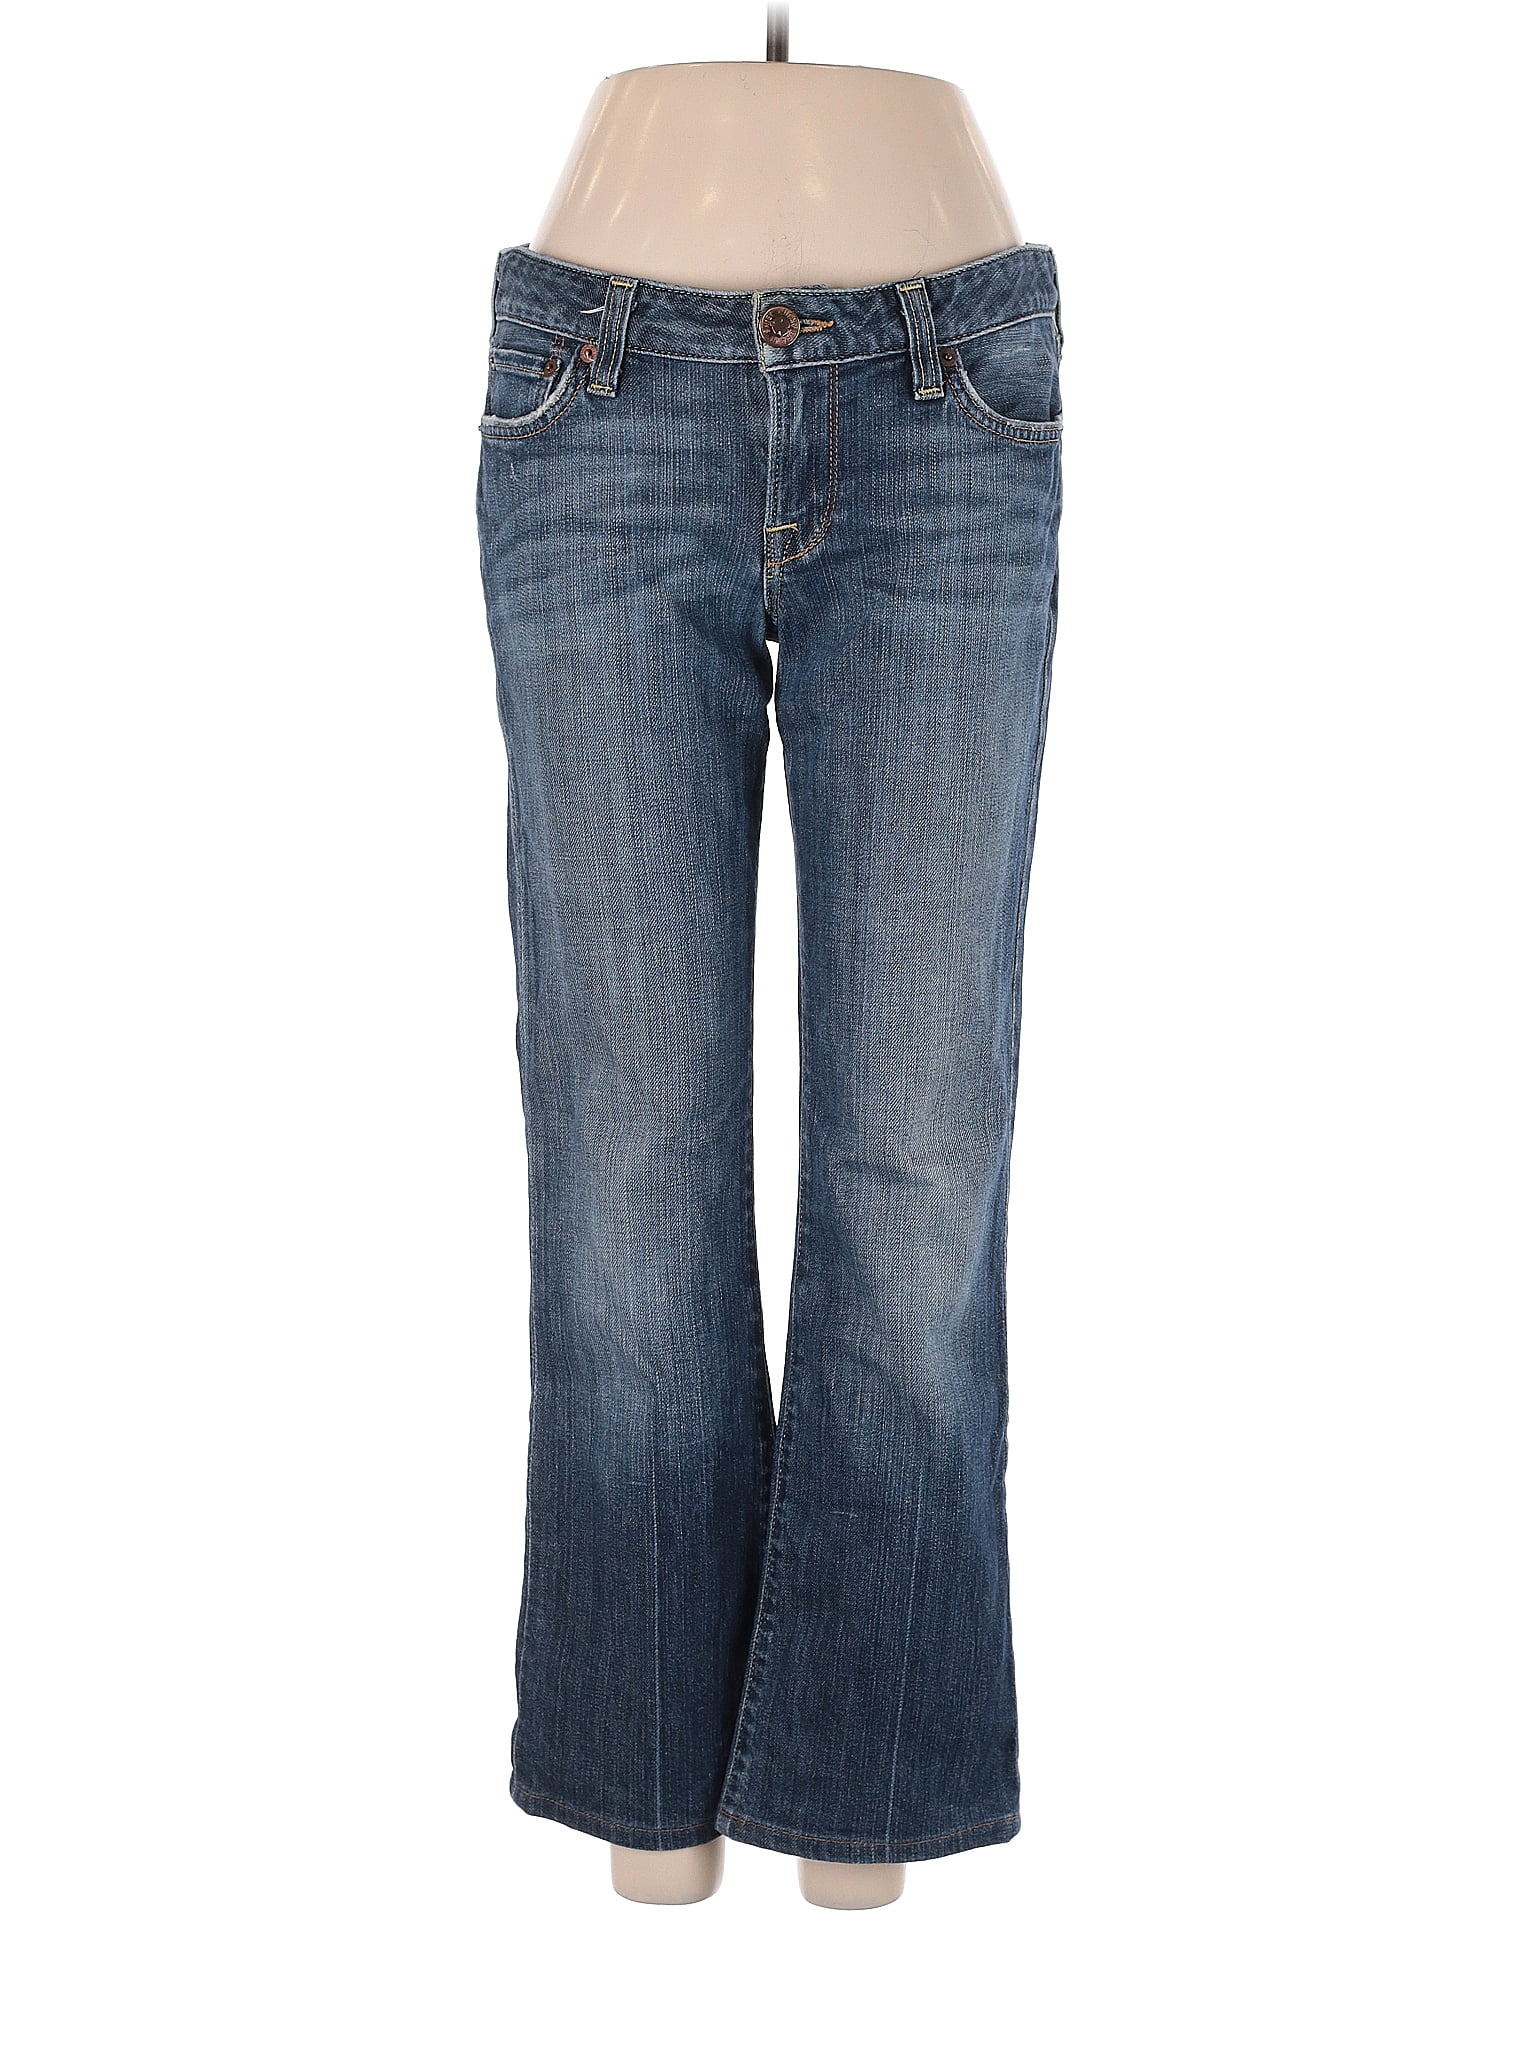 Lucky Brand Solid Blue Jeans Size 8 - 69% off | ThredUp